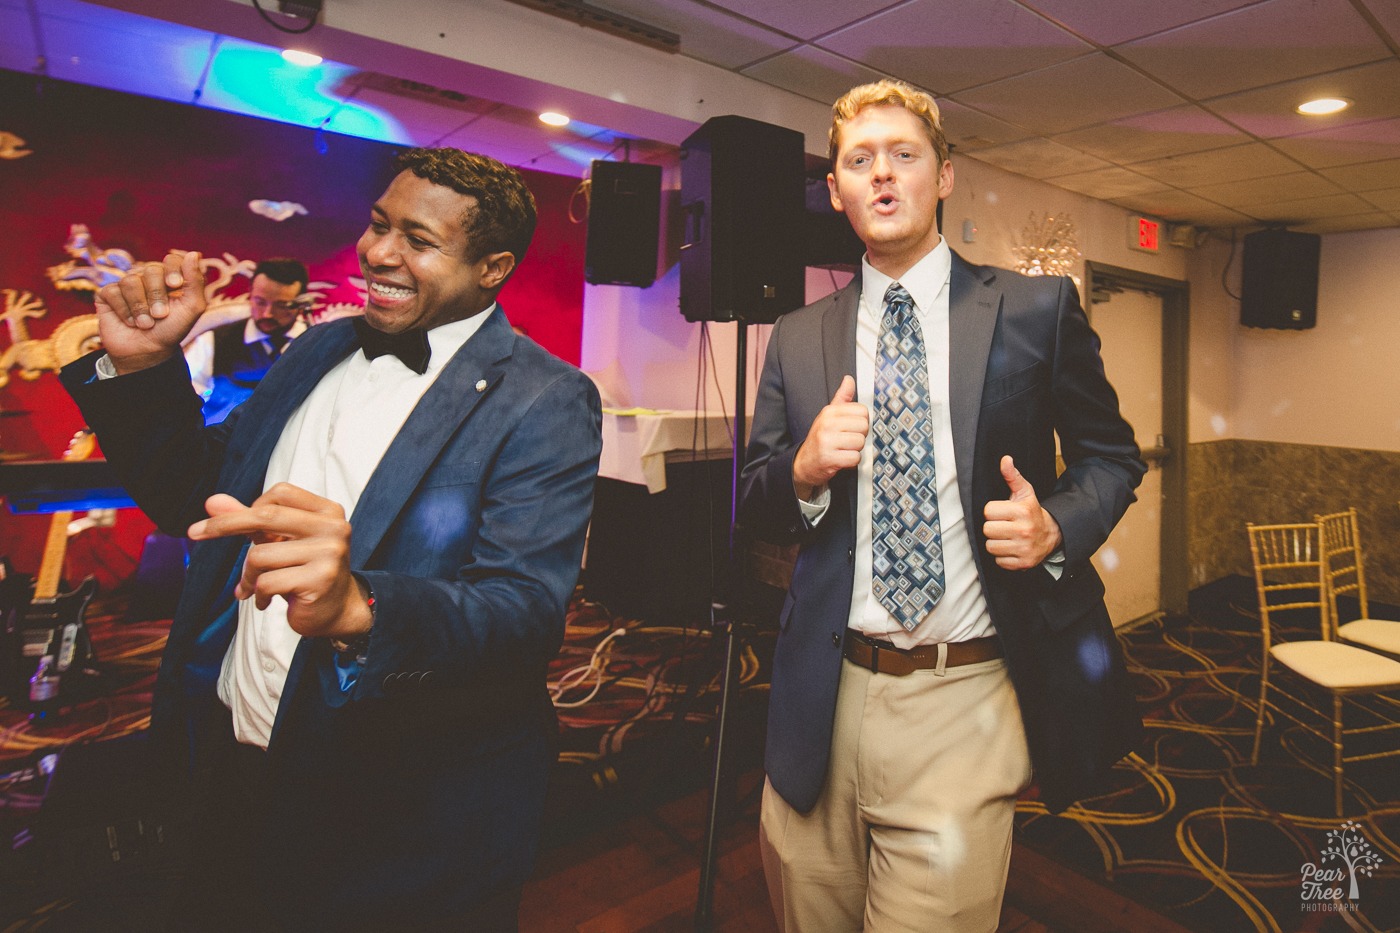 Two men in suits dancing and having fun at a wedding reception